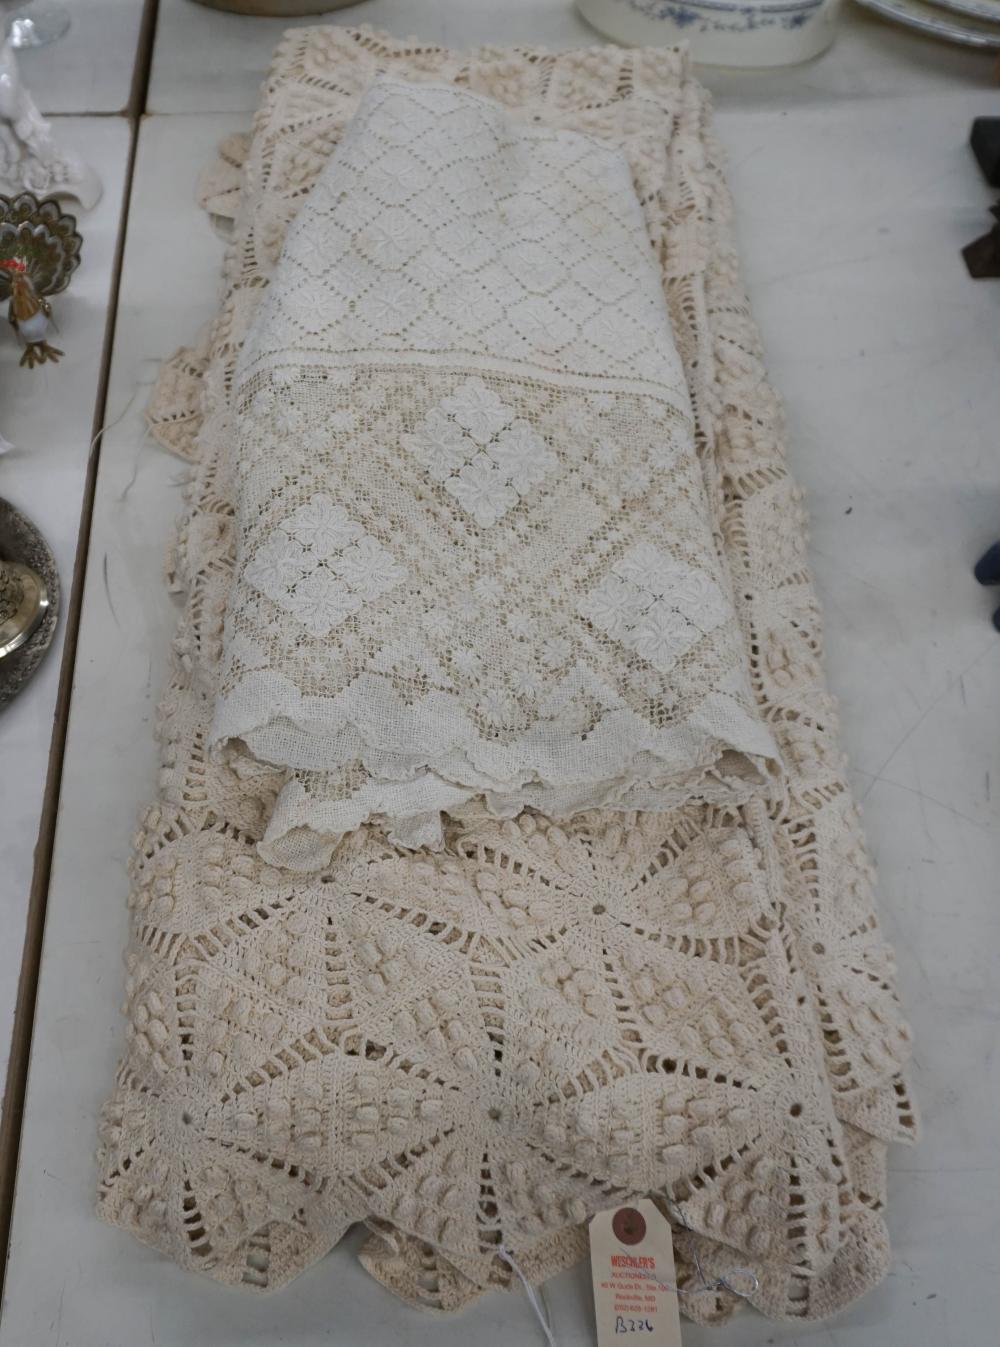 TWO CROCHETED BED SPREADS, LARGEST: